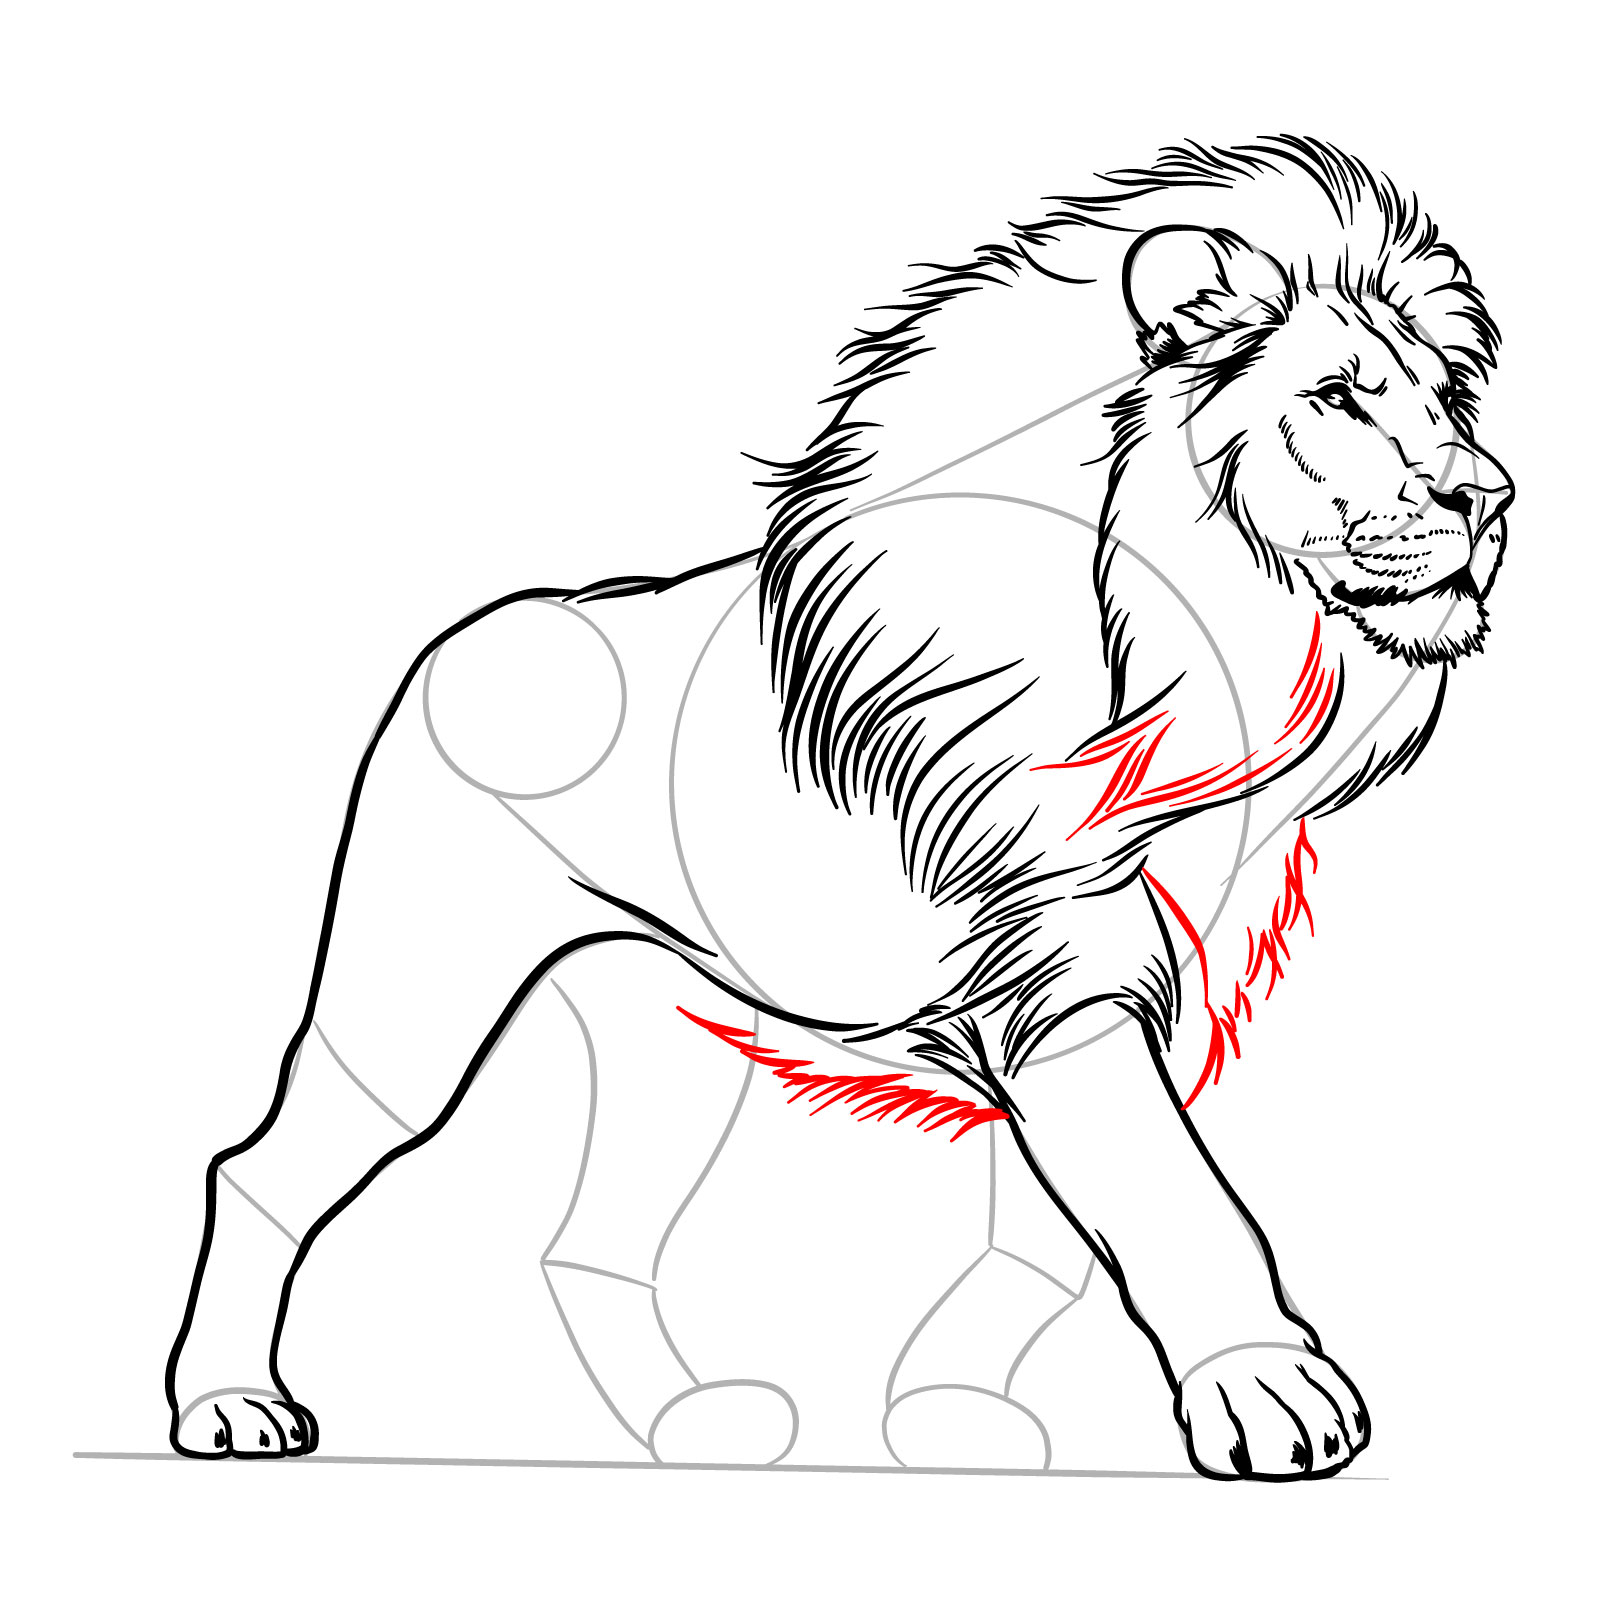 How to draw a walking lion's mane fur in neck and chest - step 12